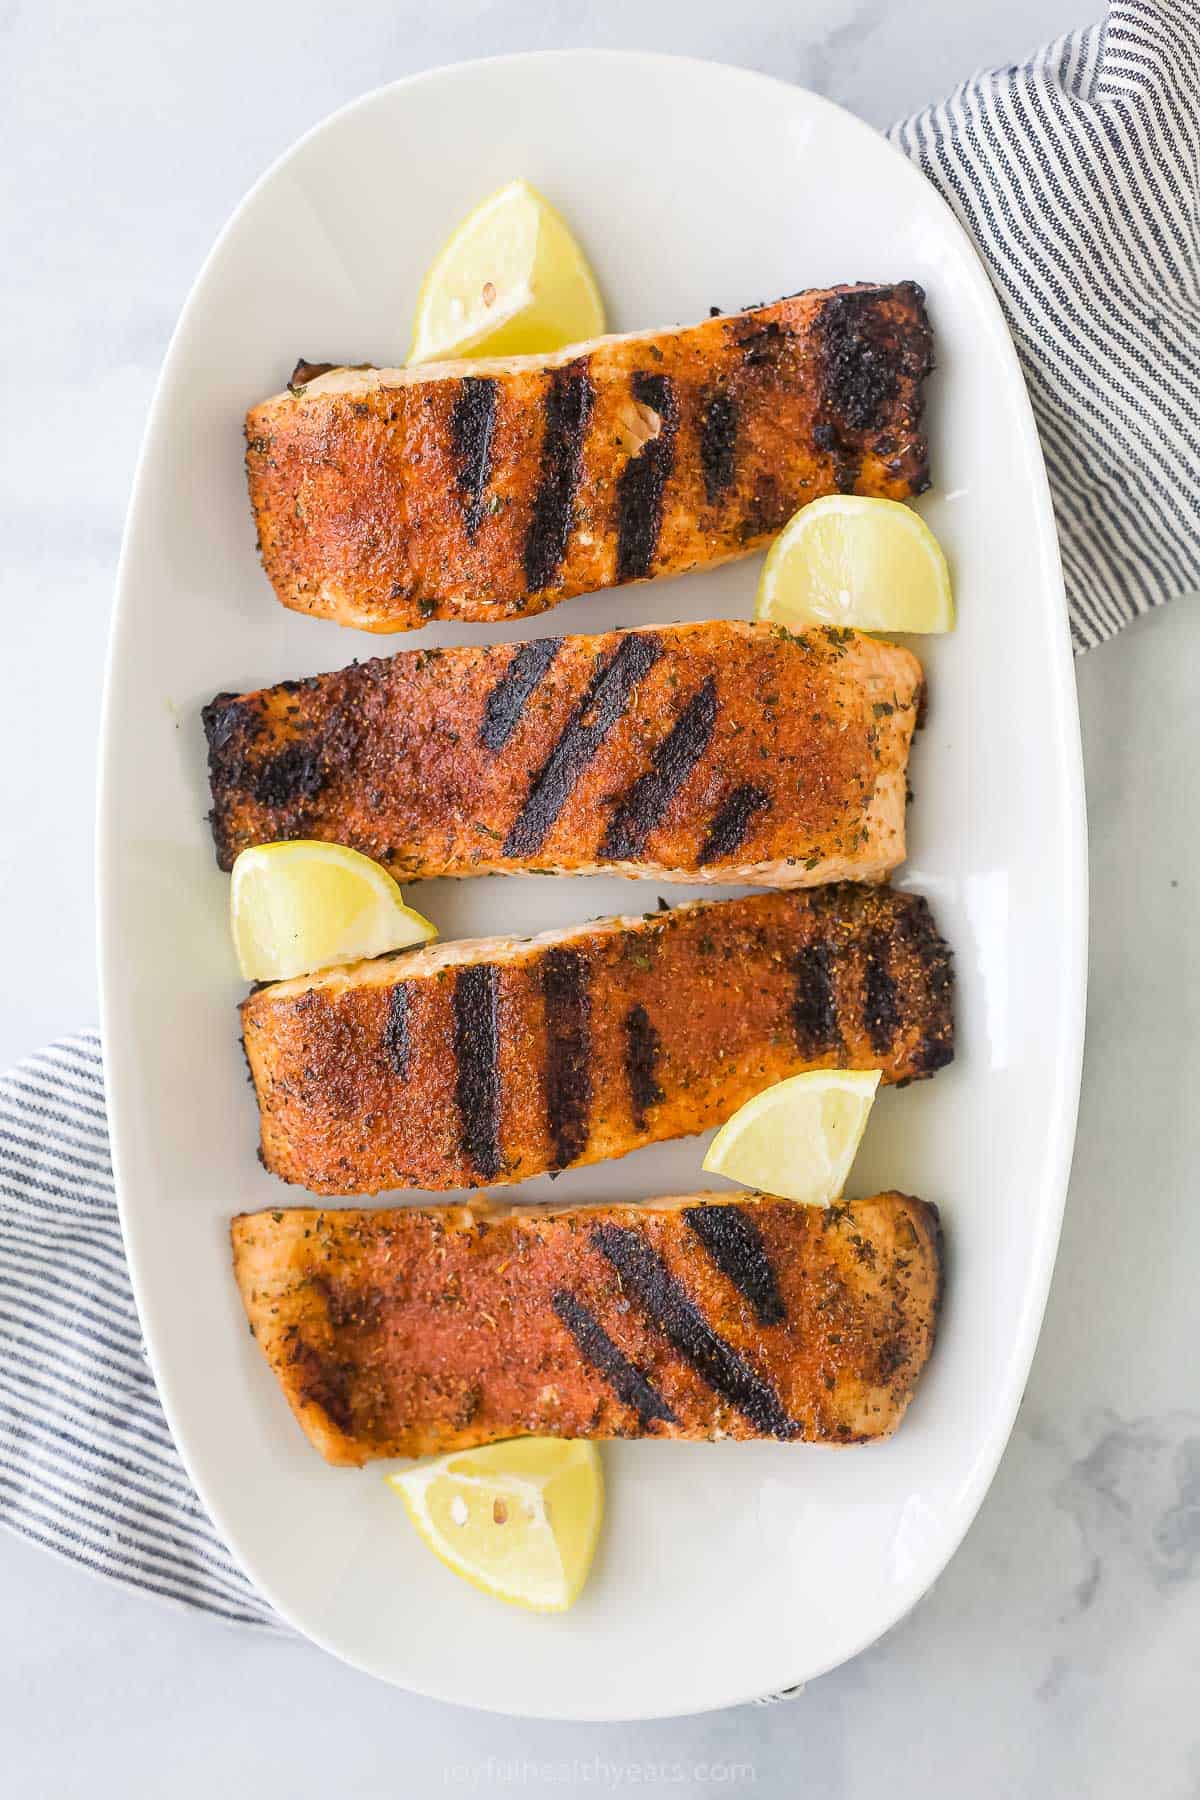 Grilled salmon fillets on a serving platter on top of a striped kitchen towel